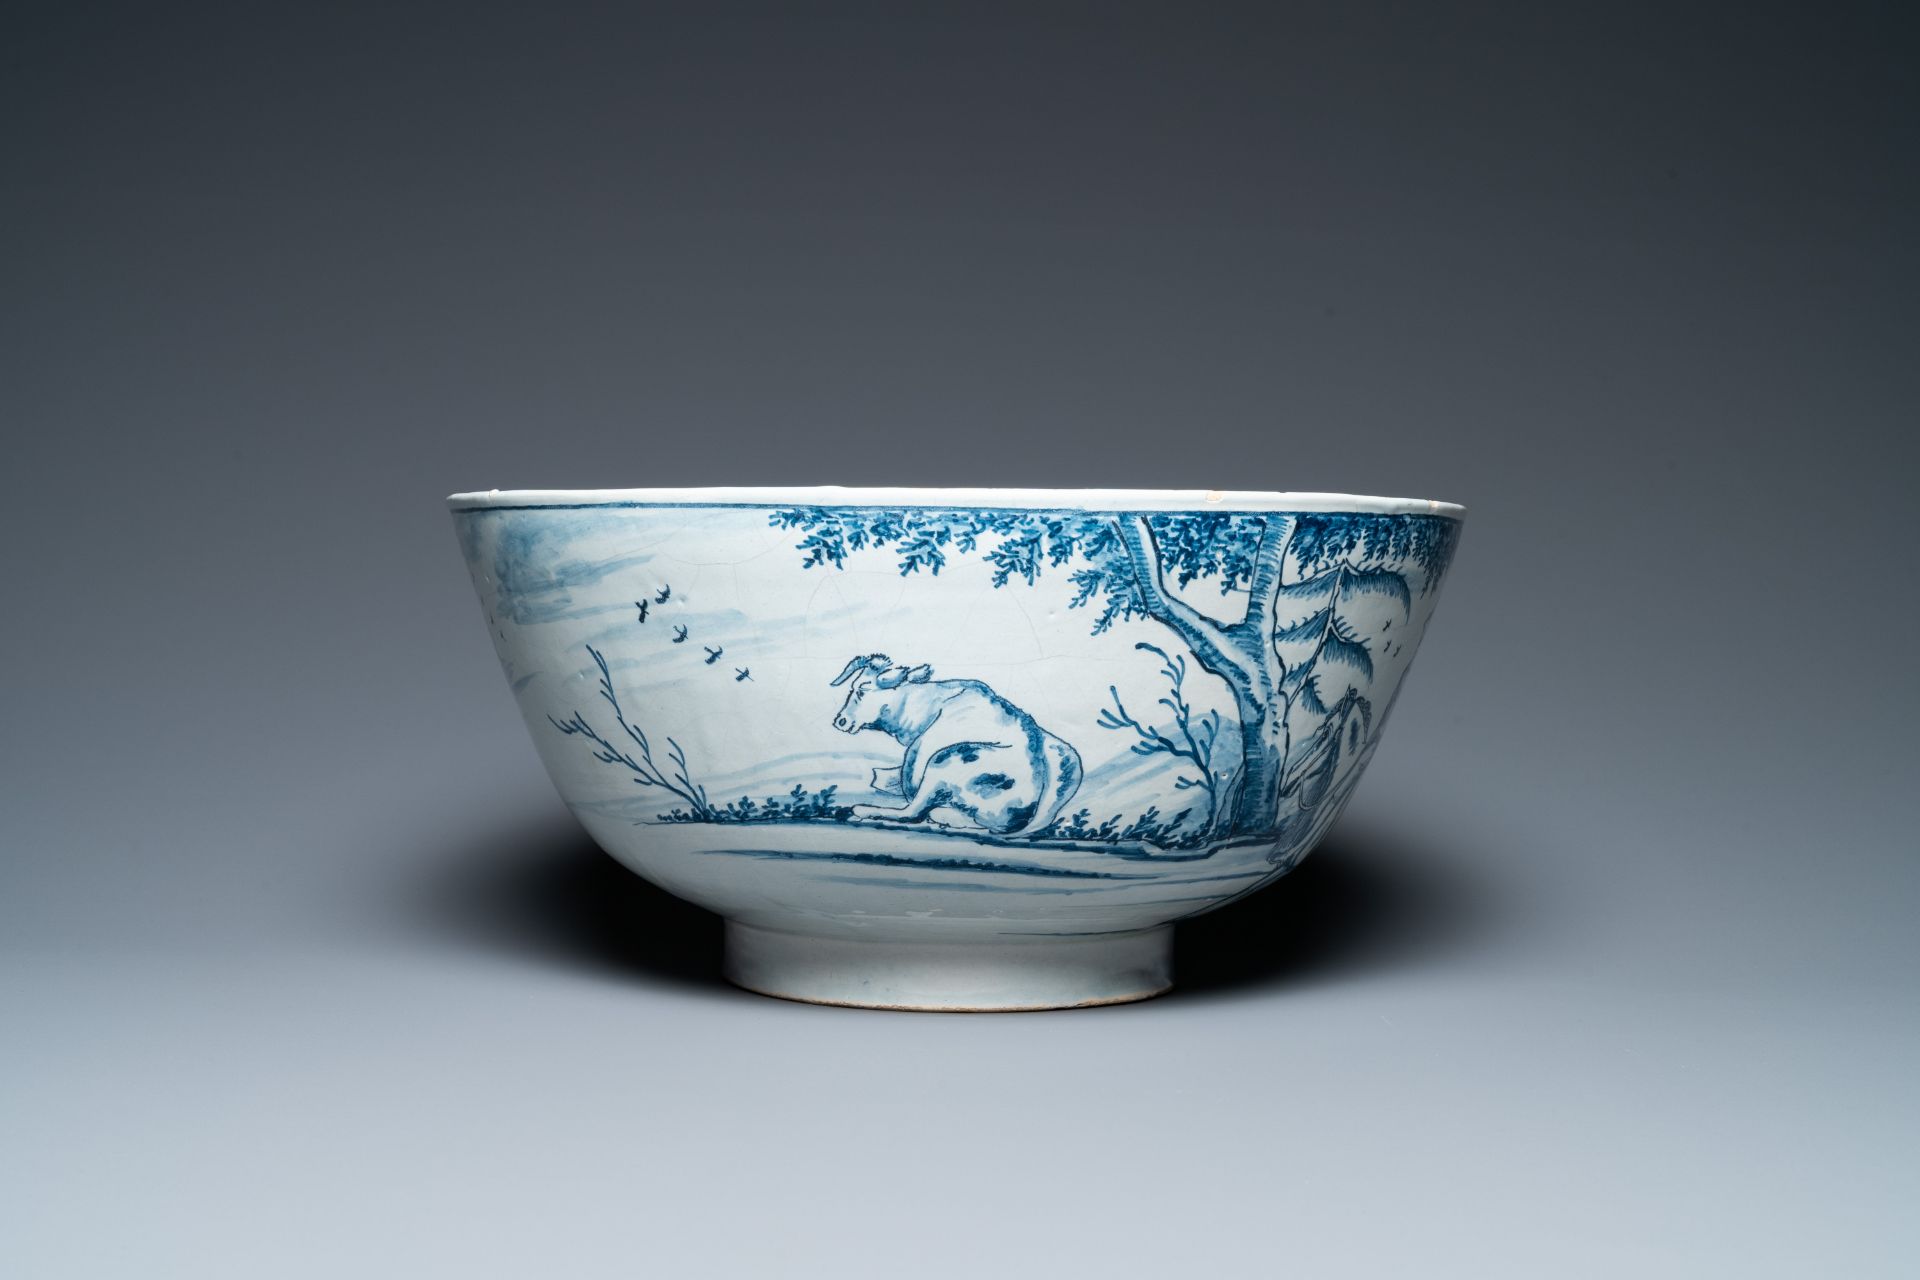 A large Dutch Delft blue and white bowl with shepherds on horsebacks, 18th C. - Image 4 of 9